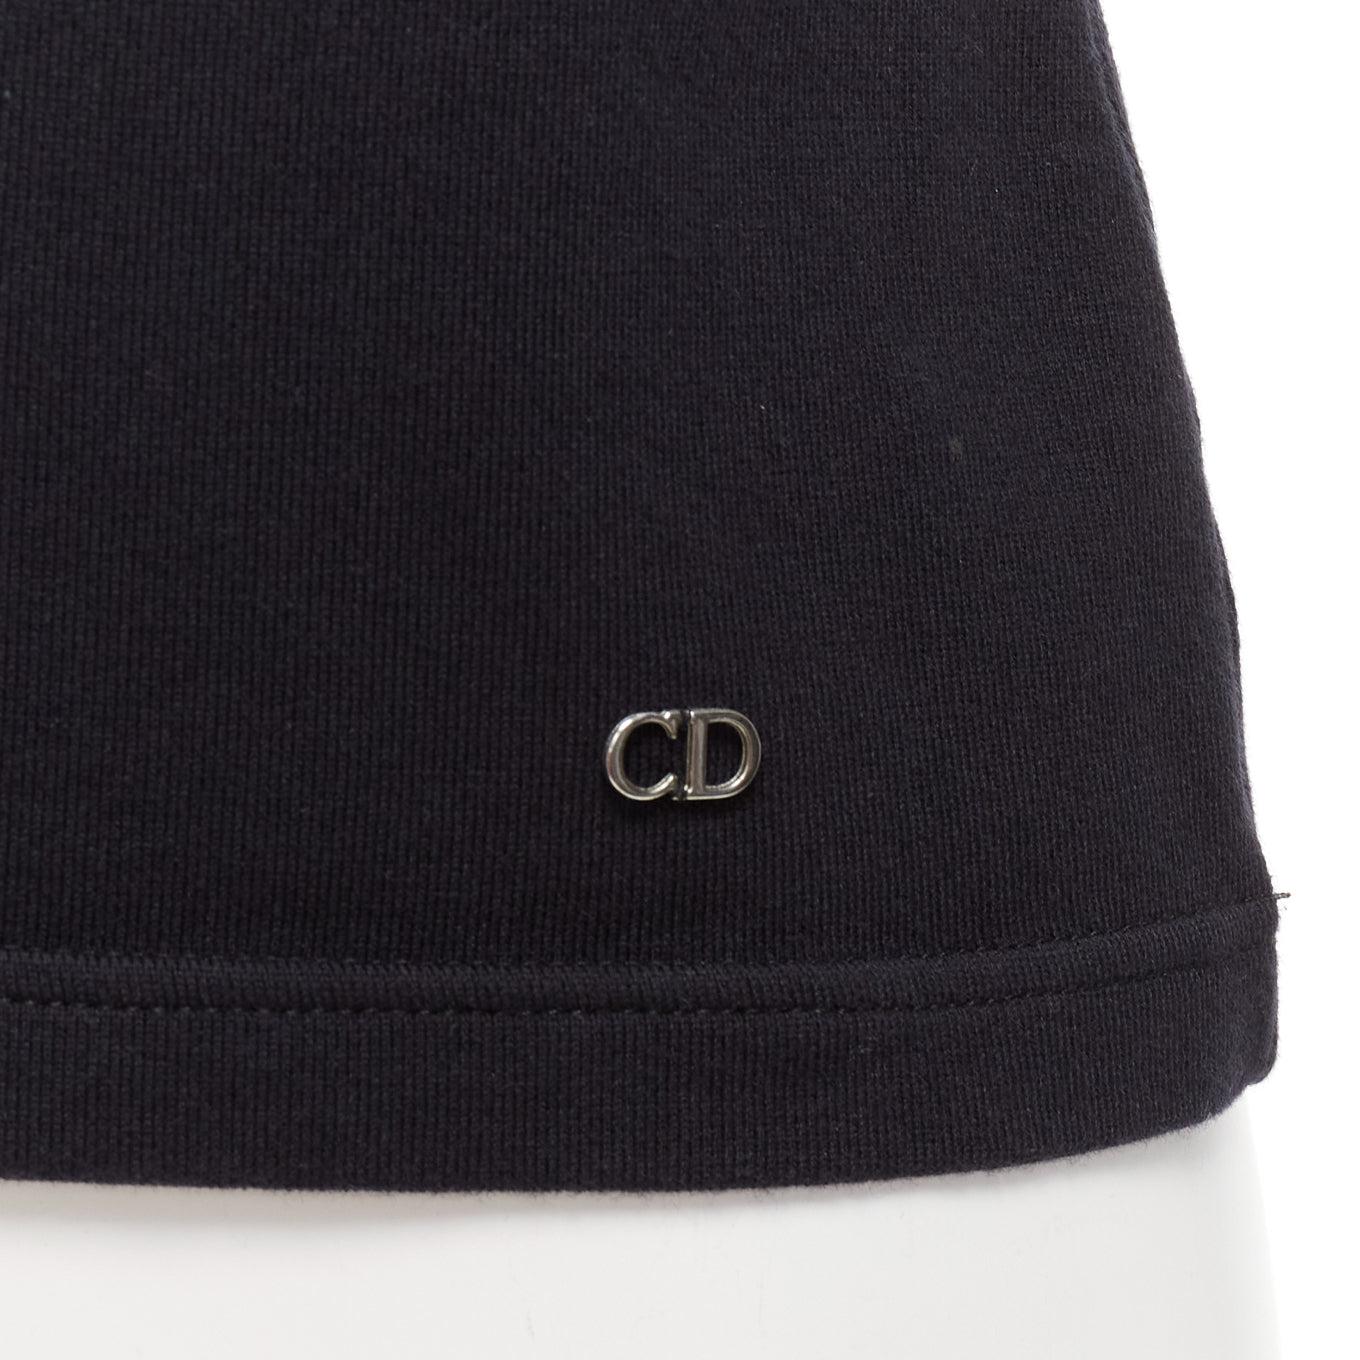 DIOR black cotton silver CD logo plate sleeveless crew neck tank top FR36 S
Reference: AAWC/A01114
Brand: Dior
Material: Cotton, Blend
Color: Black, Silver
Pattern: Solid
Closure: Pullover
Extra Details: CD logo at left hem.
Made in: